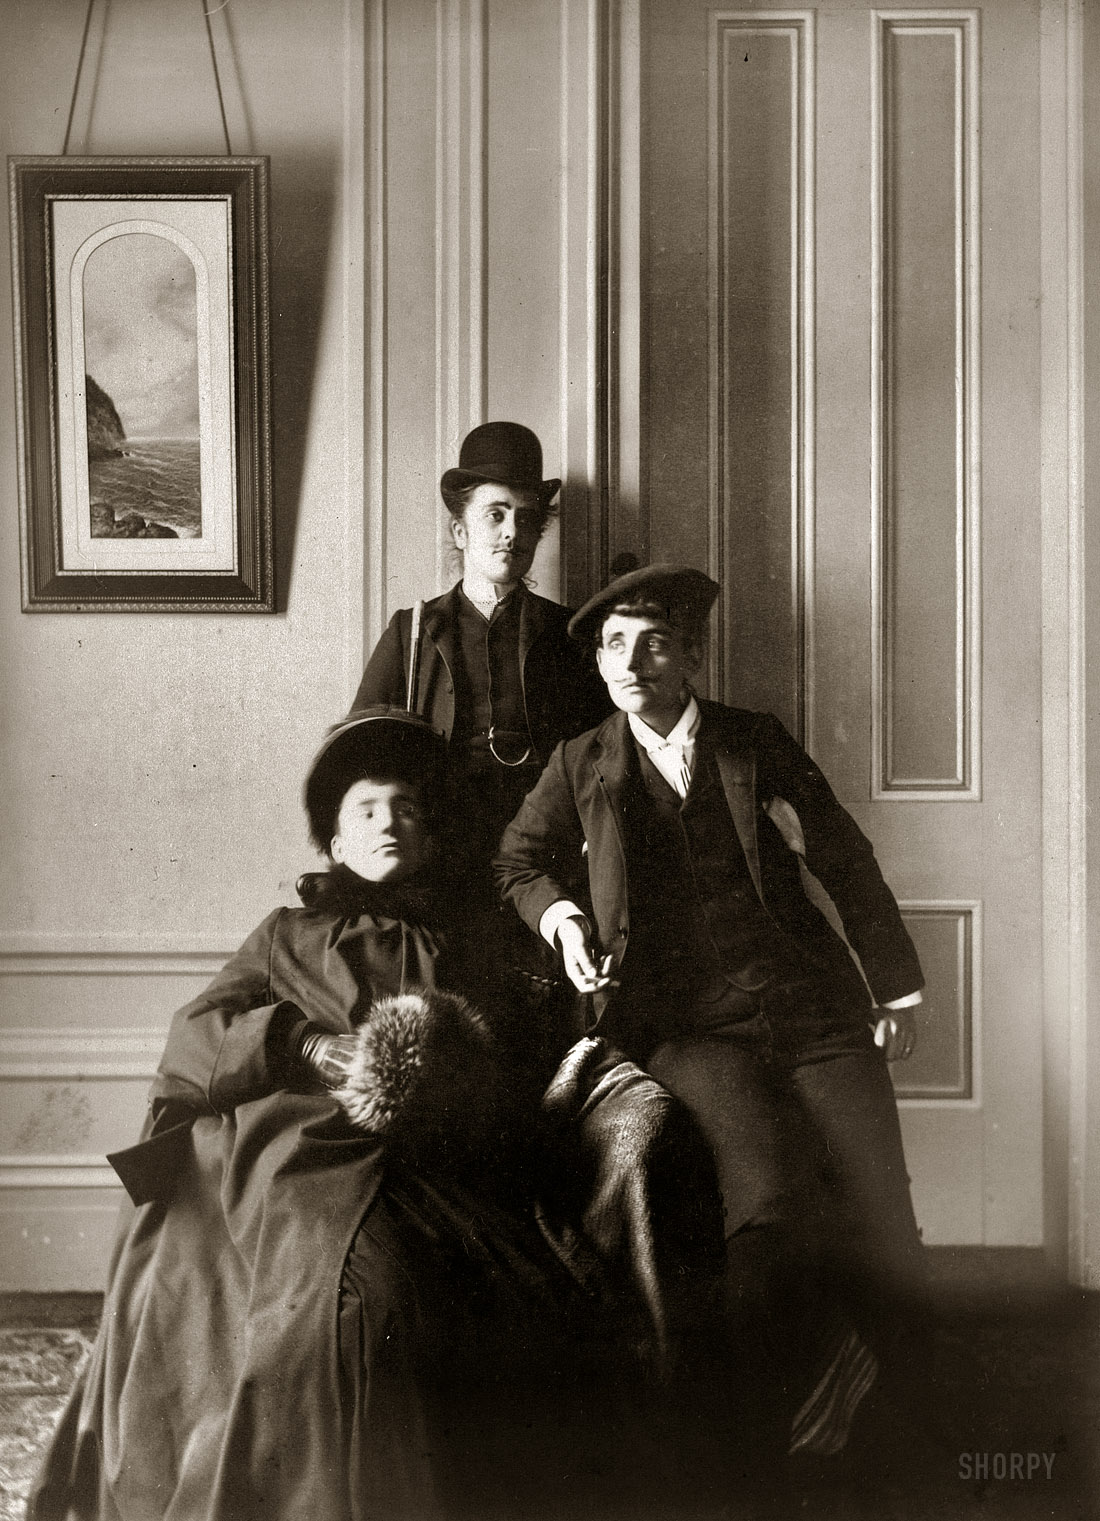 Circa 1890. "Frances Benjamin Johnston (right), full-length self-portrait dressed as a man with false mustache," posed with two similarly cross-dressing friends. The "lady" is a gent identified in a few other FBJ photos as the illustrator Mills Thompson. Albumen print by Frances Benjamin Johnston. View full size.